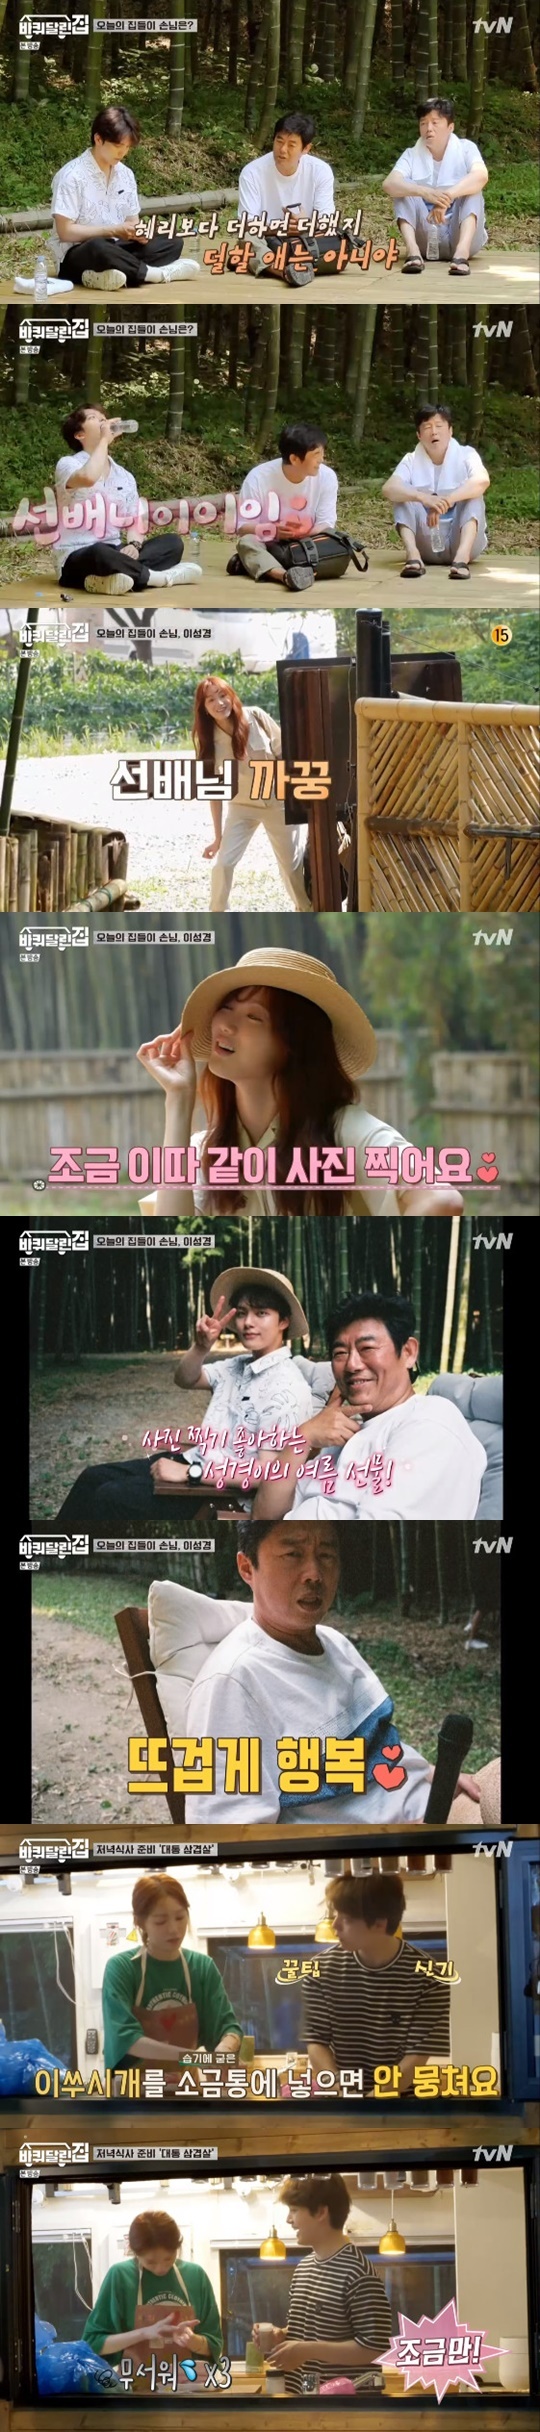 Seoul = = Lee Sung-kyung appeared as the third Housewarming guest of The Wheeled House.In the TVN entertainment program The Wheeled House broadcasted on the afternoon of the 9th, the third housewarming guest and actor Lee Sung-kyung came to the three brothers who settled in Damyang, Jeonnam.Sung Dong-il has been working together with Lee Sung-kyung, the guest of the day, and Drama Its okay, Im in love, and asked for his best regards on the phone just before Lee Sung-kyung arrived.Kim Hee-won and Yeo Jin-goo were first-class with Lee Sung-kyung, so Sung Dong-il said before his call with Lee Sung-kyung, The voice will be floating.The first word is Sir! I talked about Lee Sung-kyung.Kim Hee-won asked, More than Hyeri? and mentioned Hyeri, who appeared as the first guest and added fun to his youthful appearance.Then Sung Dong-il was convinced that I added more than Hyeri, I am not less. At that moment Lee Sung-kyung called and laughed at the voice Sung Dong-il had expected.Lee Sung-kyung, who arrived afterwards, unveiled a package full of gifts from hats to Bluetooth speakers and ice-water machines.In addition, Lee Sung-kyung took out the camera in his usual hobby, taking pictures of his three brothers and talking without hesitation.Lee Sung-kyung then helped three people to run around quickly and actively participated in the establishment of mosquito nets and evening preparations.The four people who enjoyed healing while walking in the front yard of the chronic forest prepared bamboo bamboo bamboo belly for dinner.Lee Sung-kyung, along with Yeo Jin-goo, prepared food to eat with pork belly to put in bamboo barrels, and made a friendly atmosphere while meeting for the first time.Lee Sung-kyung quickly adapted to the wheeled house, sporting Moonlighting The Electric Affinities, raising expectations for his later performance.On the other hand, tvN wheeled house is a variety program that invites precious people to wander around the country on wheeled houses and lives a day. It is broadcast every Thursday at 9 pm.